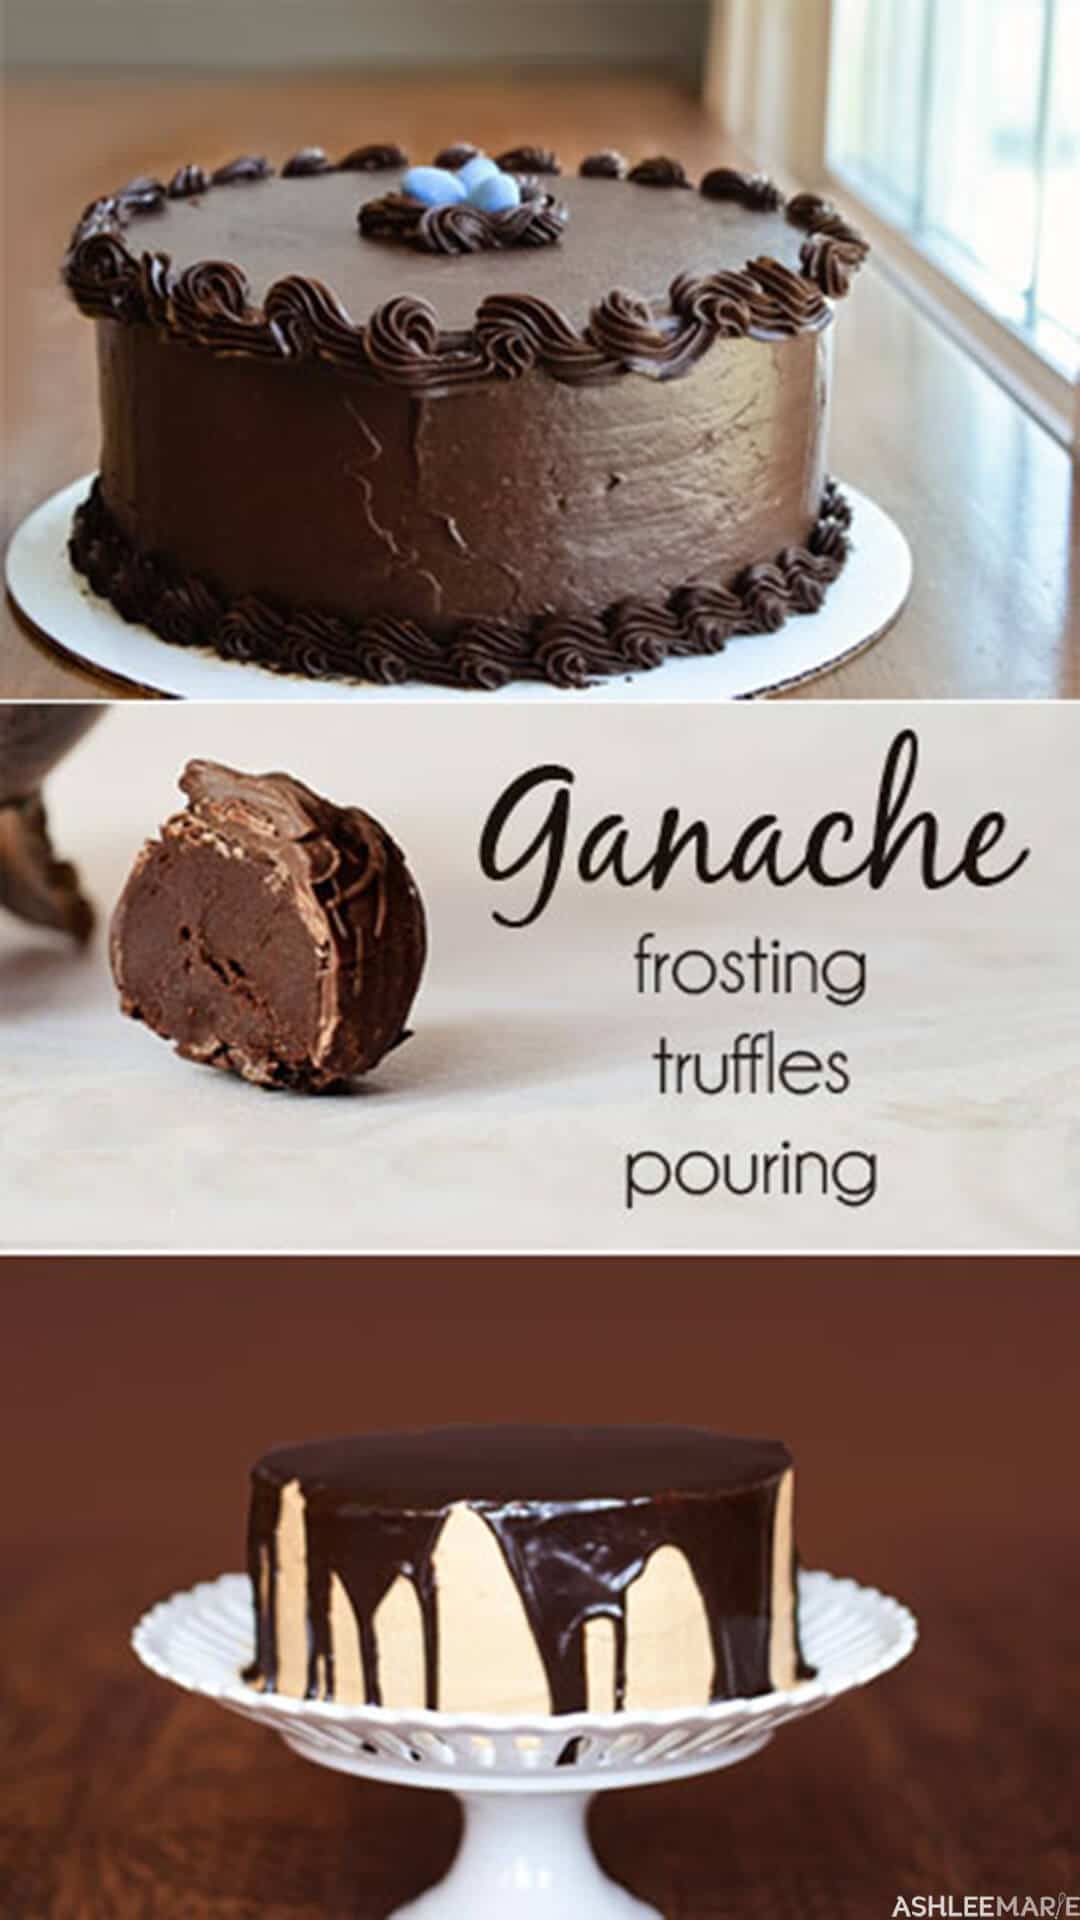 Ganache   20 uses   frosting, truffles & pouring   Ashlee Marie ...